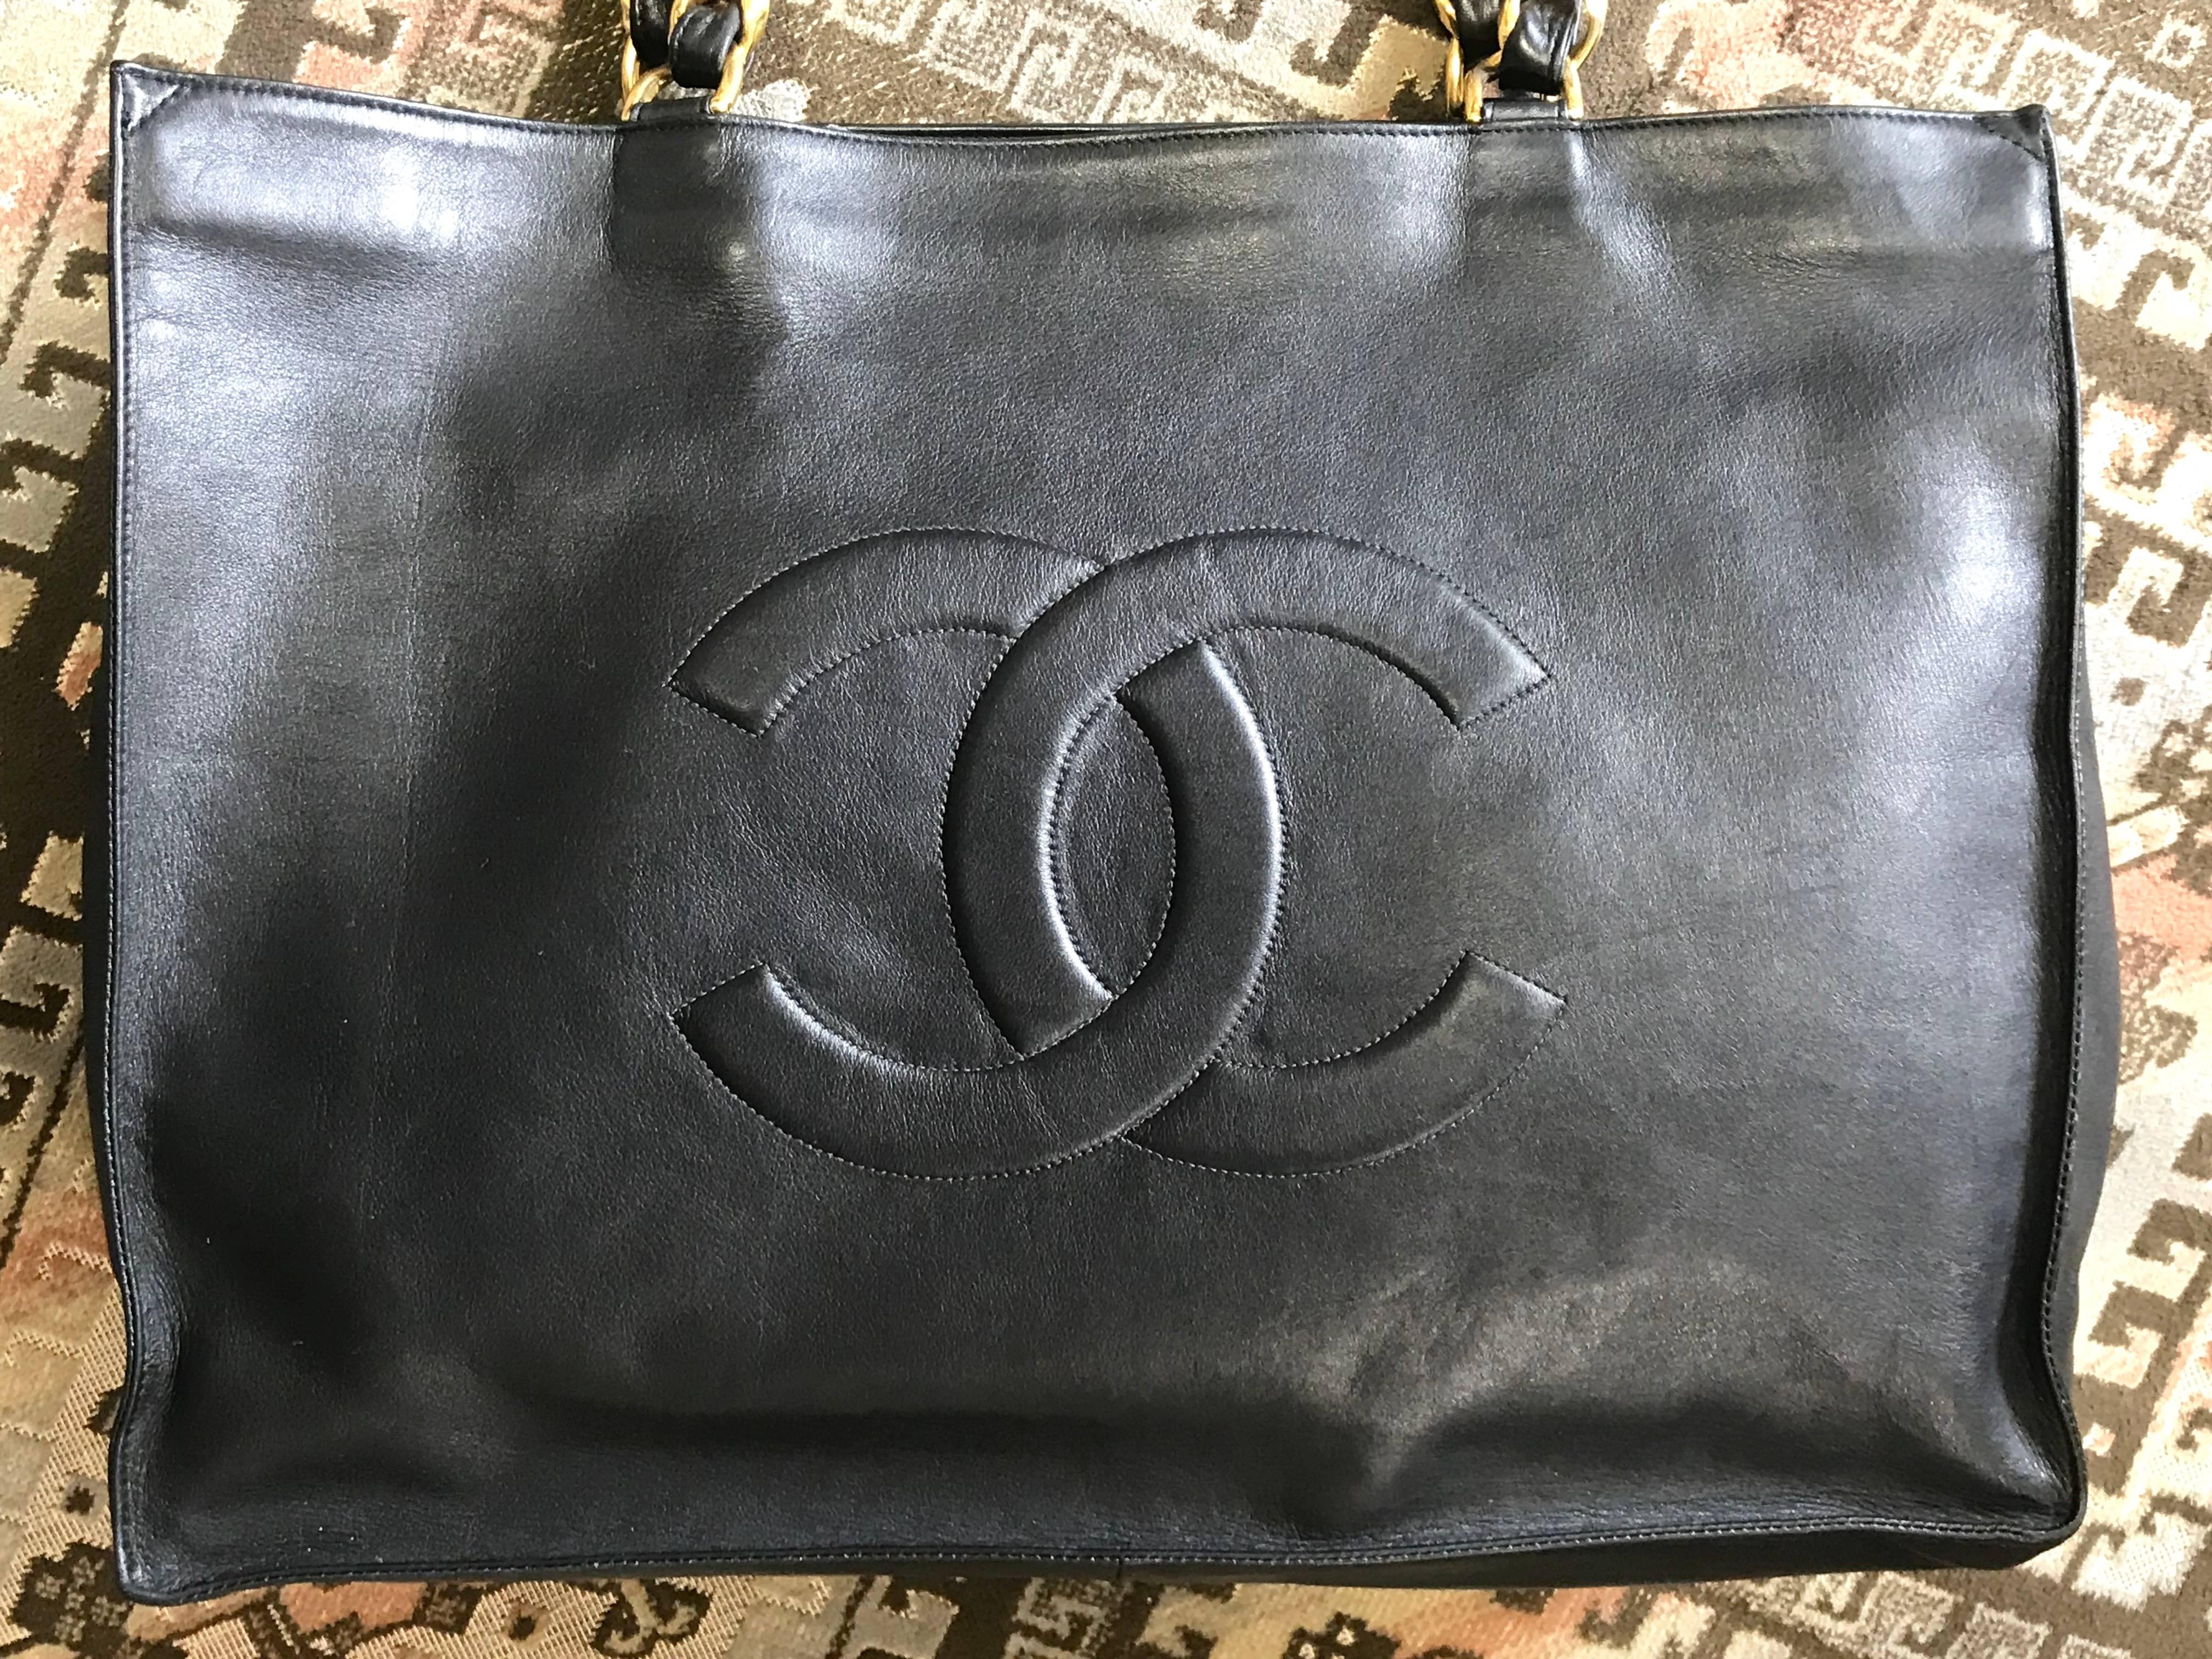 Gray Chanel Vintage black calfskin large tote bag with gold tone chain handles and CC